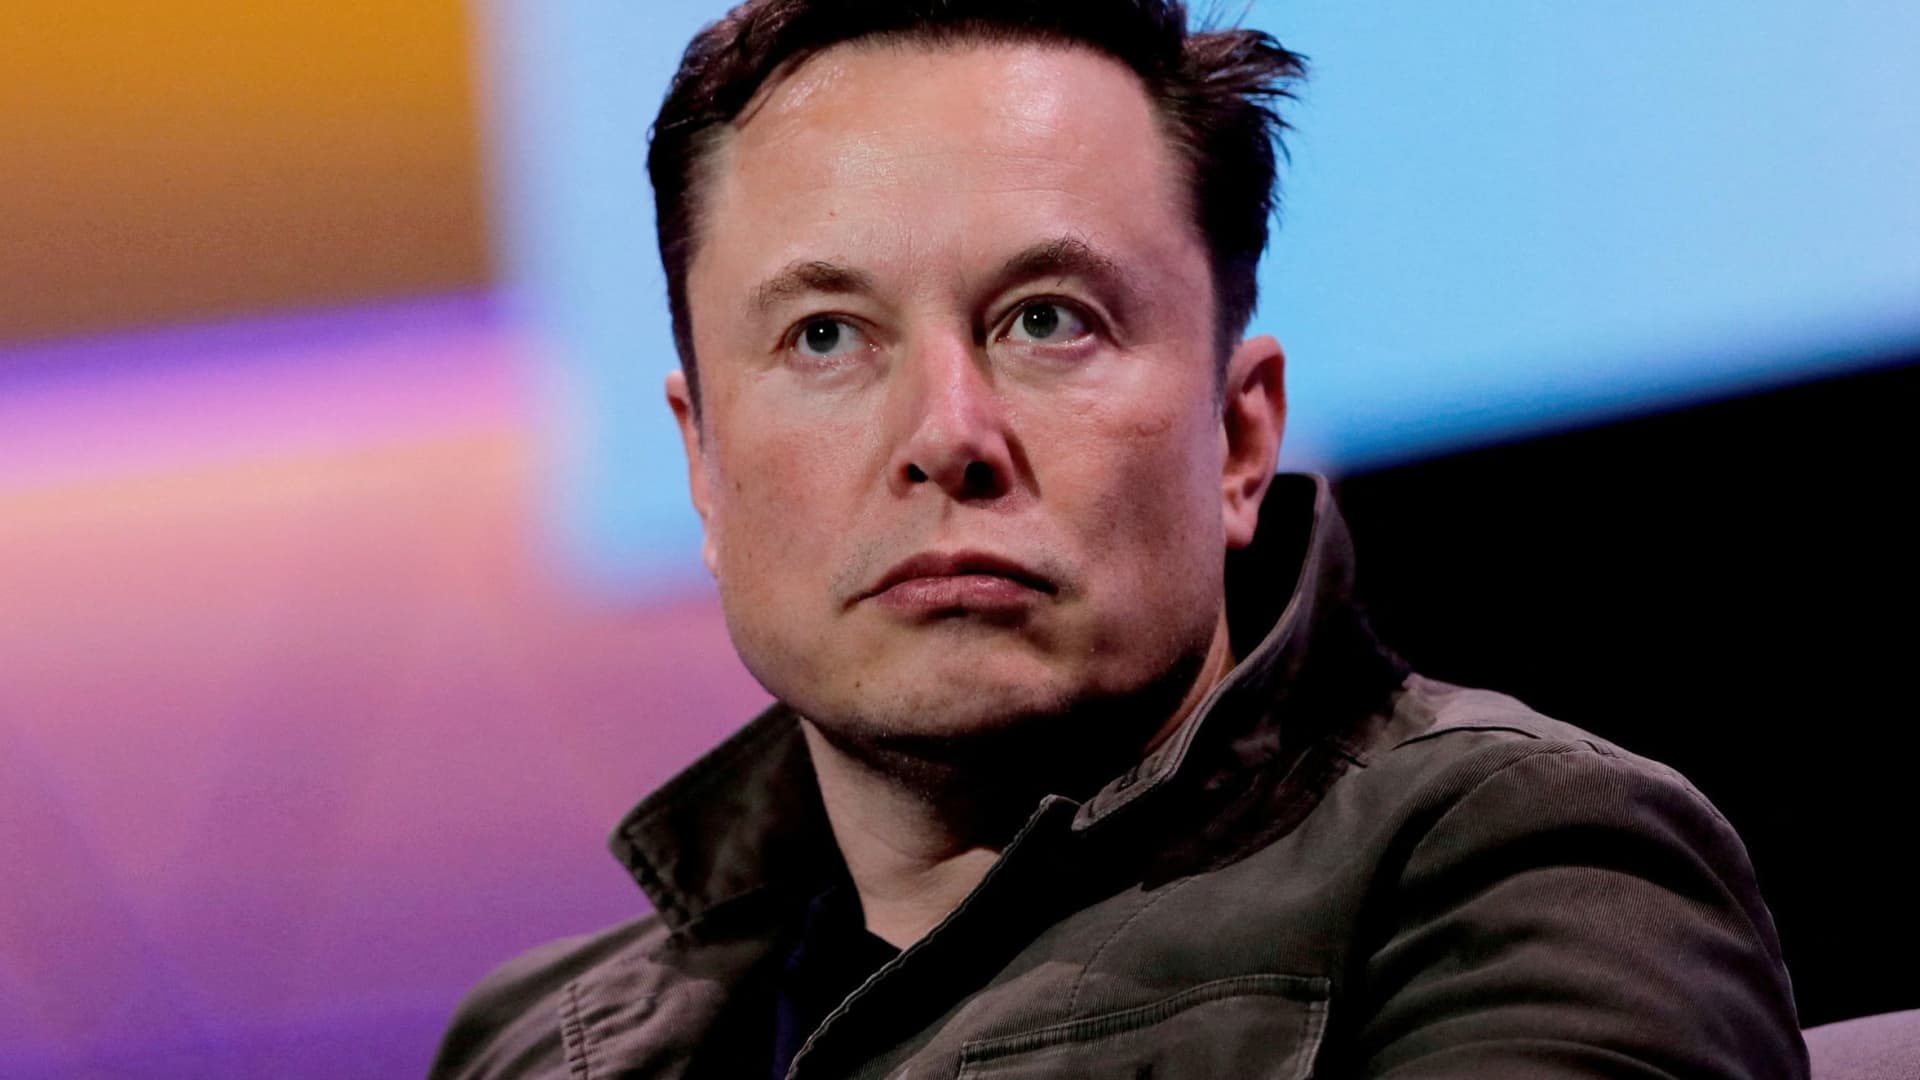 Elon Musk tells Tesla employees don’t be ‘bothered by stock market craziness’